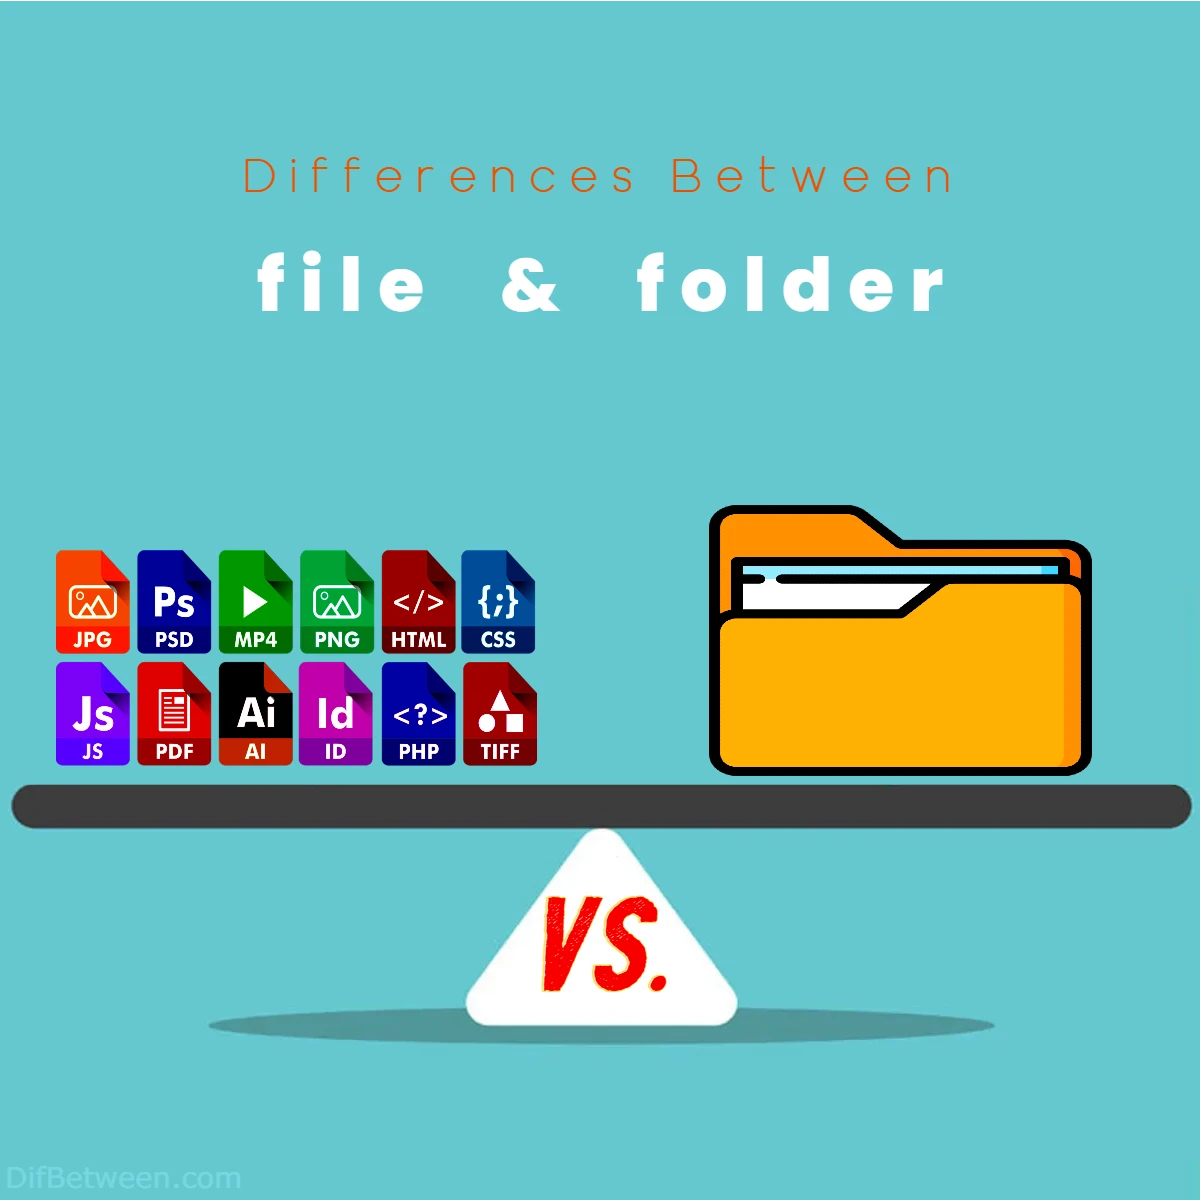 Differences Between file vs folder